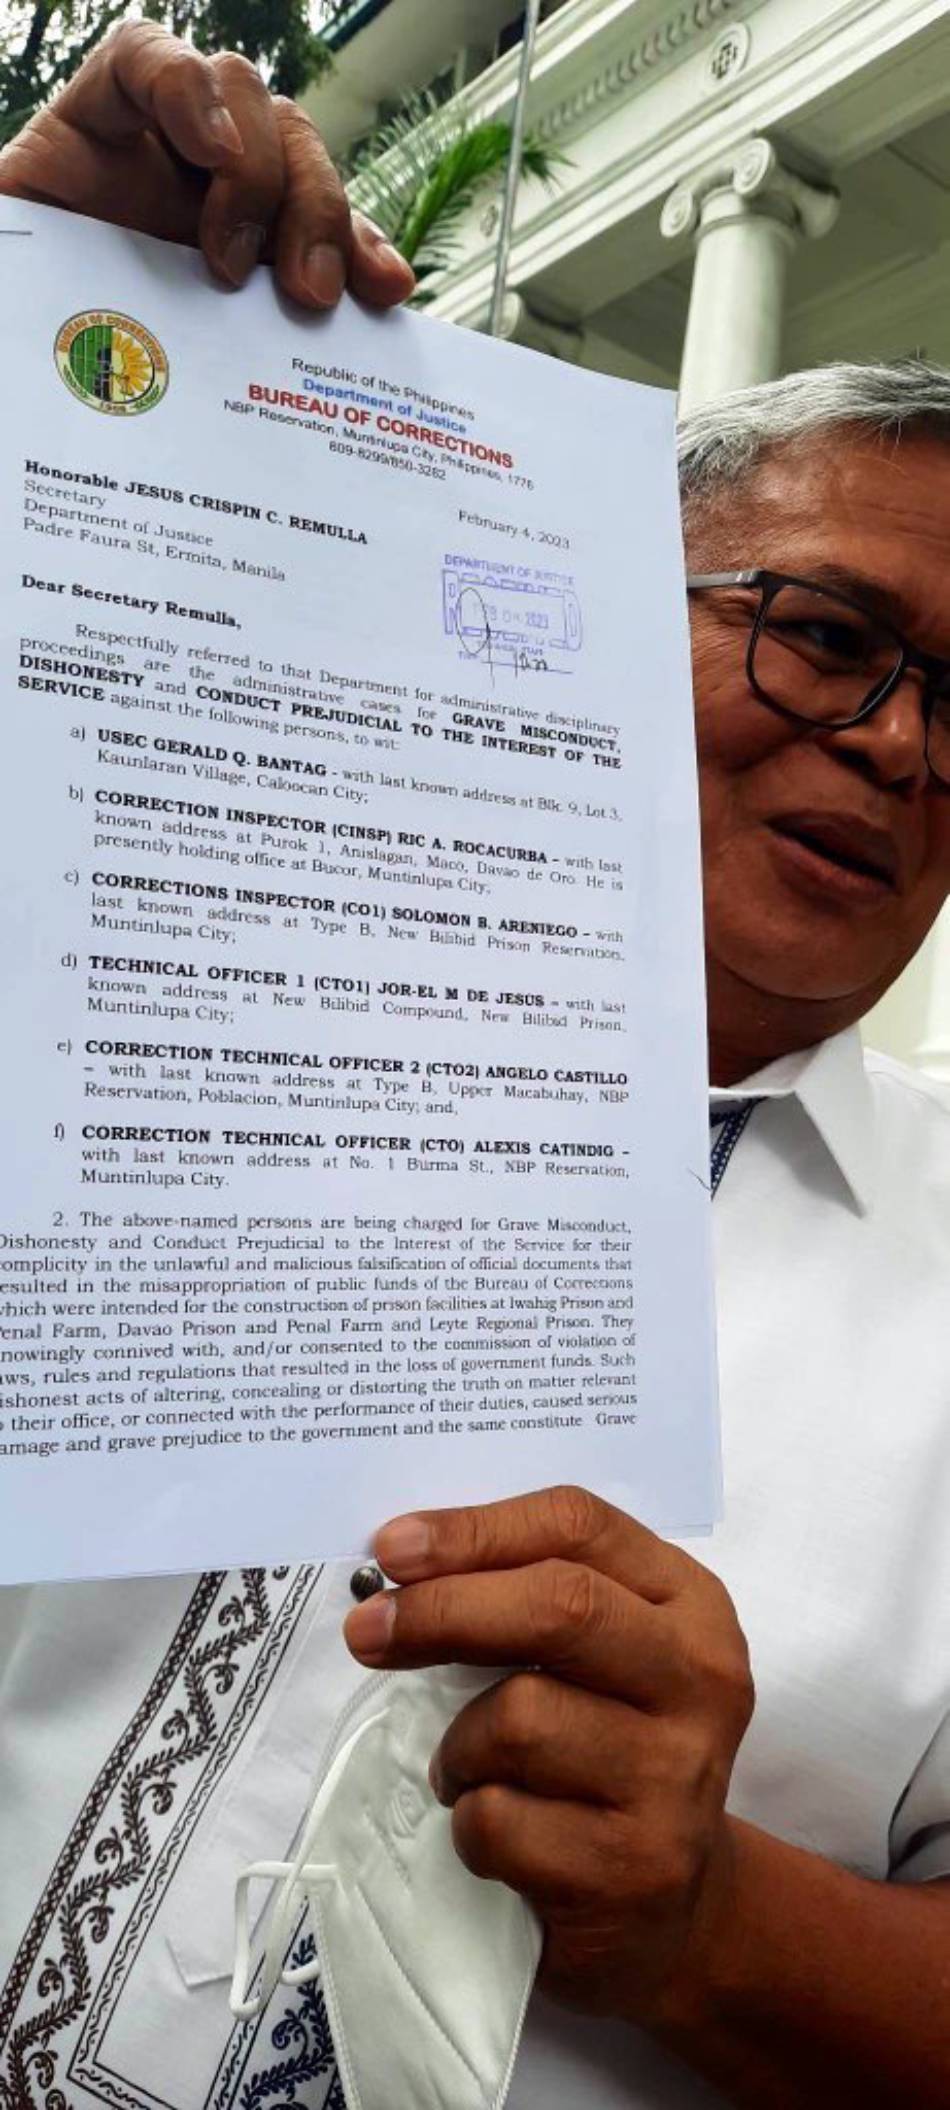  Suspended prisons chief Gerald Bantag faces fresh raps for plunder, malversation of public funds, graft, grave misconduct and dishonesty over allegedly unfinished projects. Johnson Manabat, ABS-CBN News